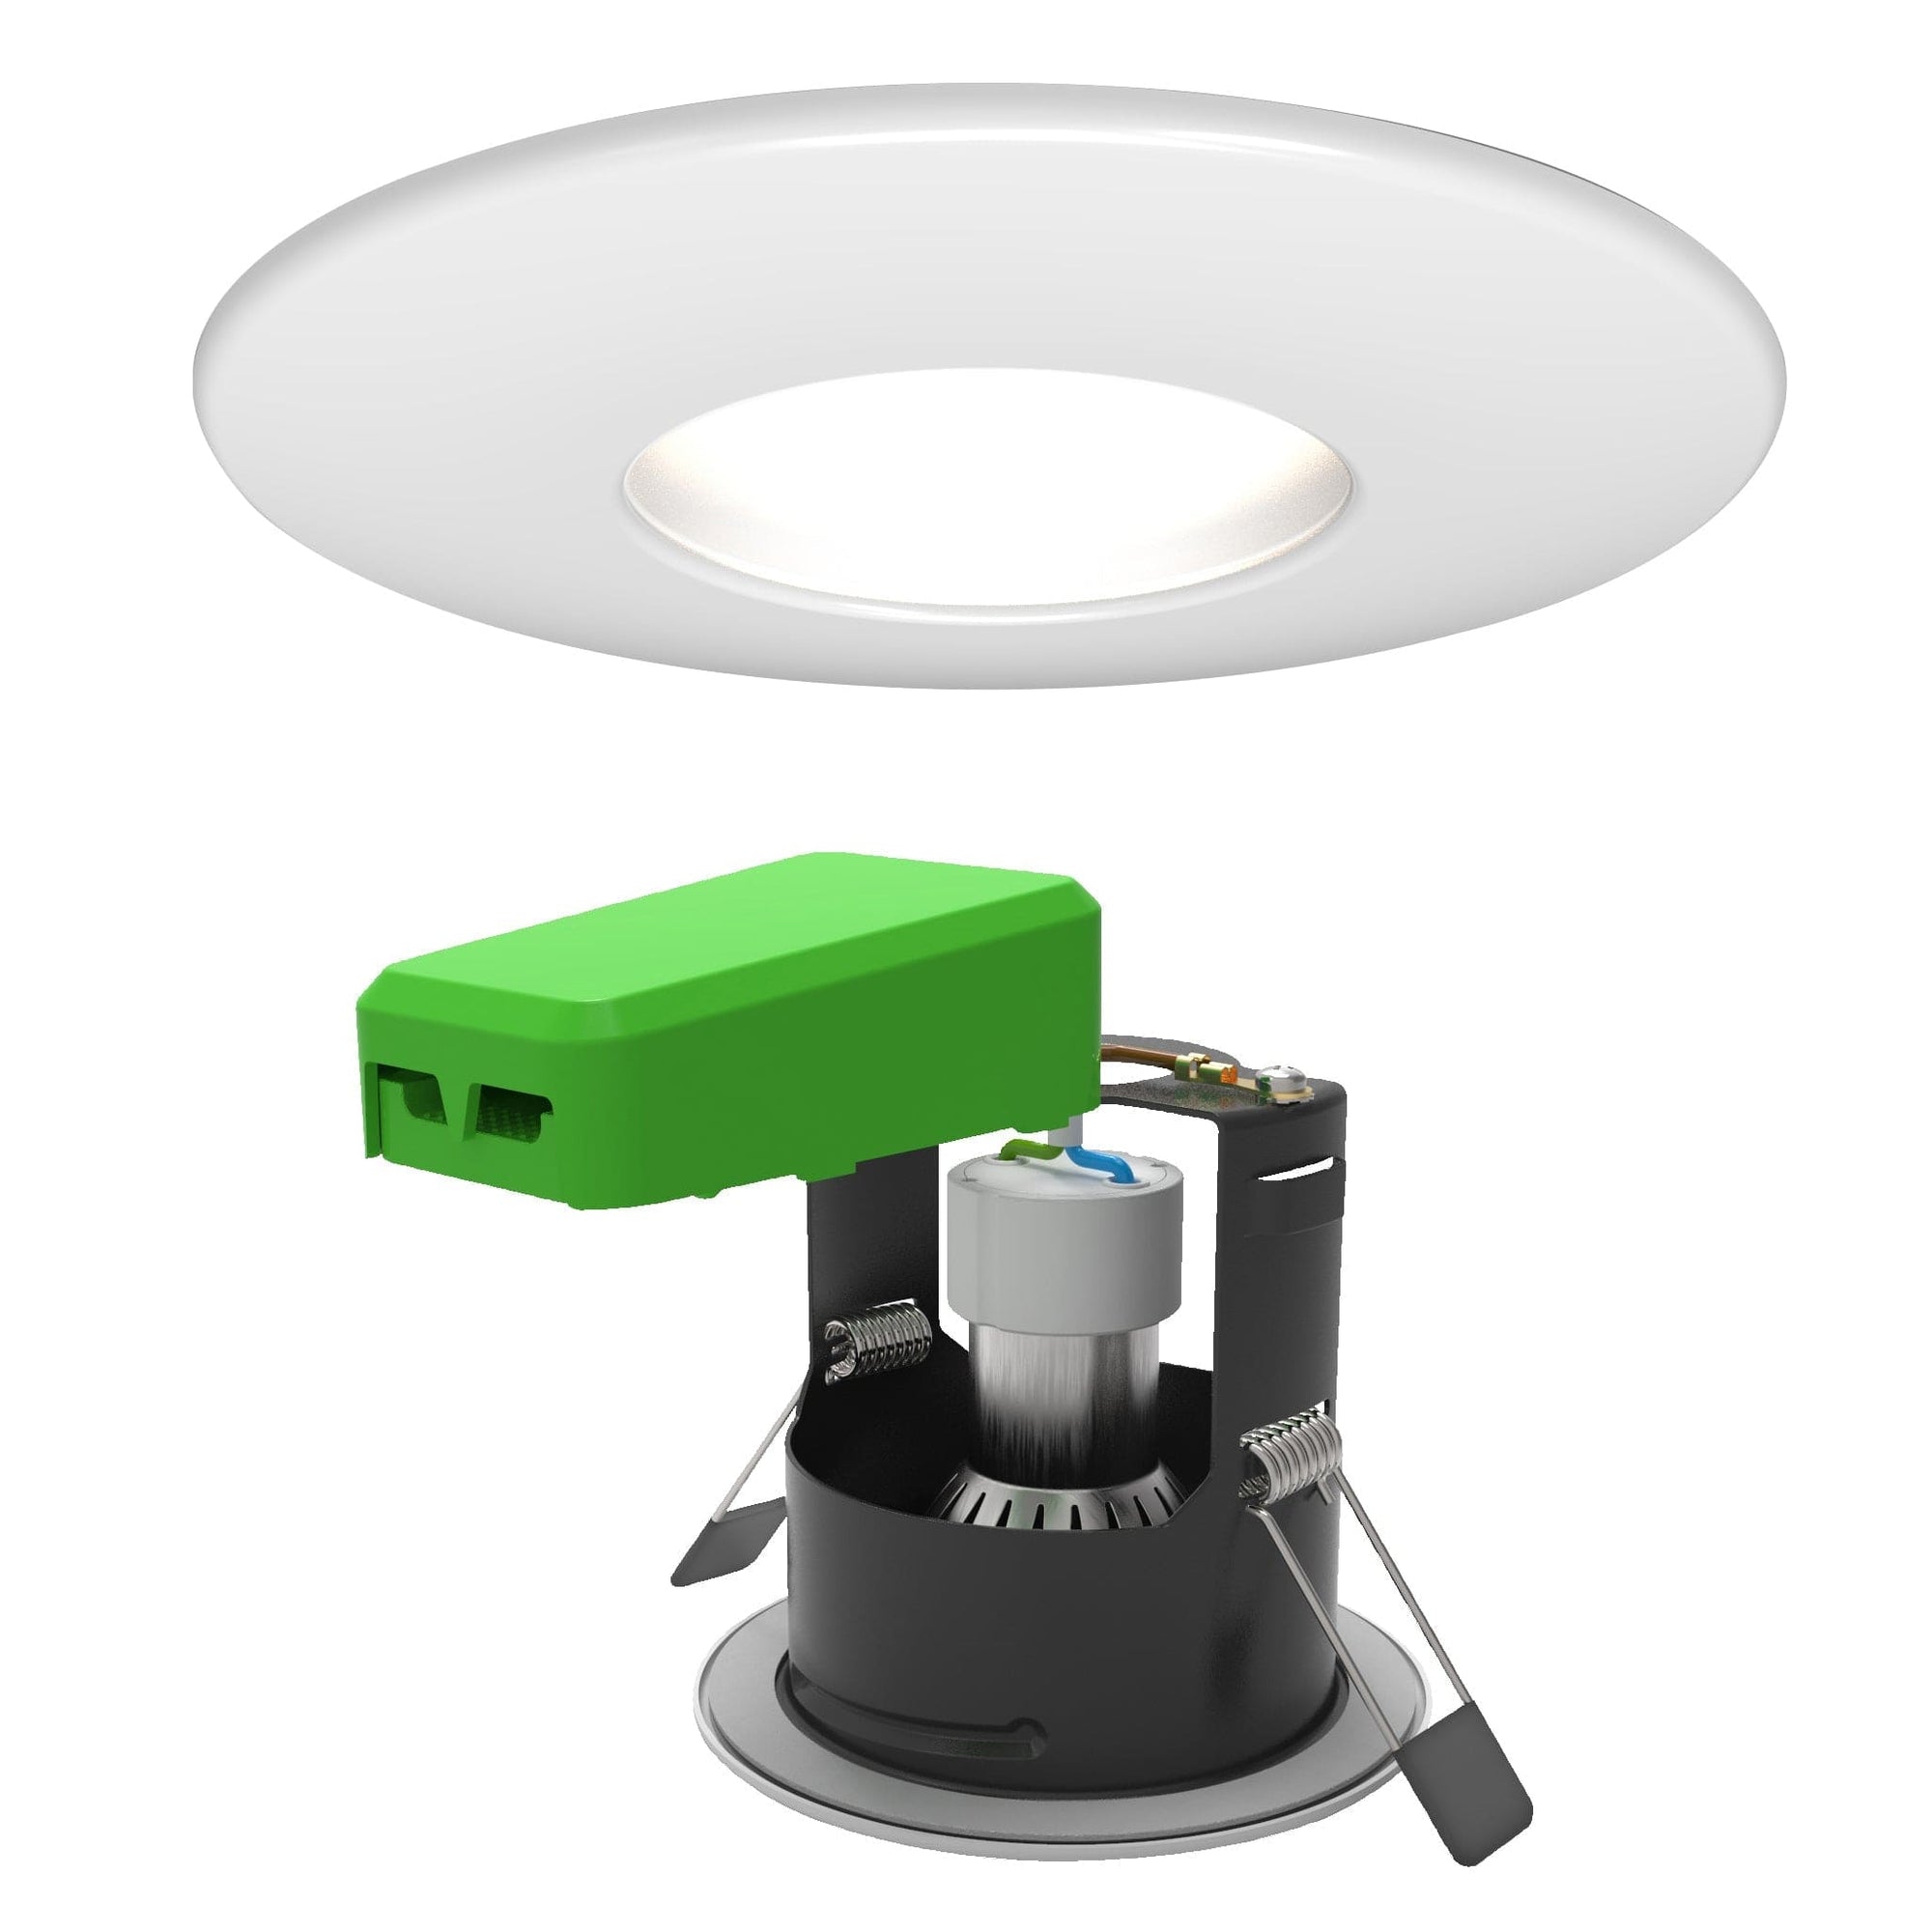 Image of a 4lite smart light on a white background